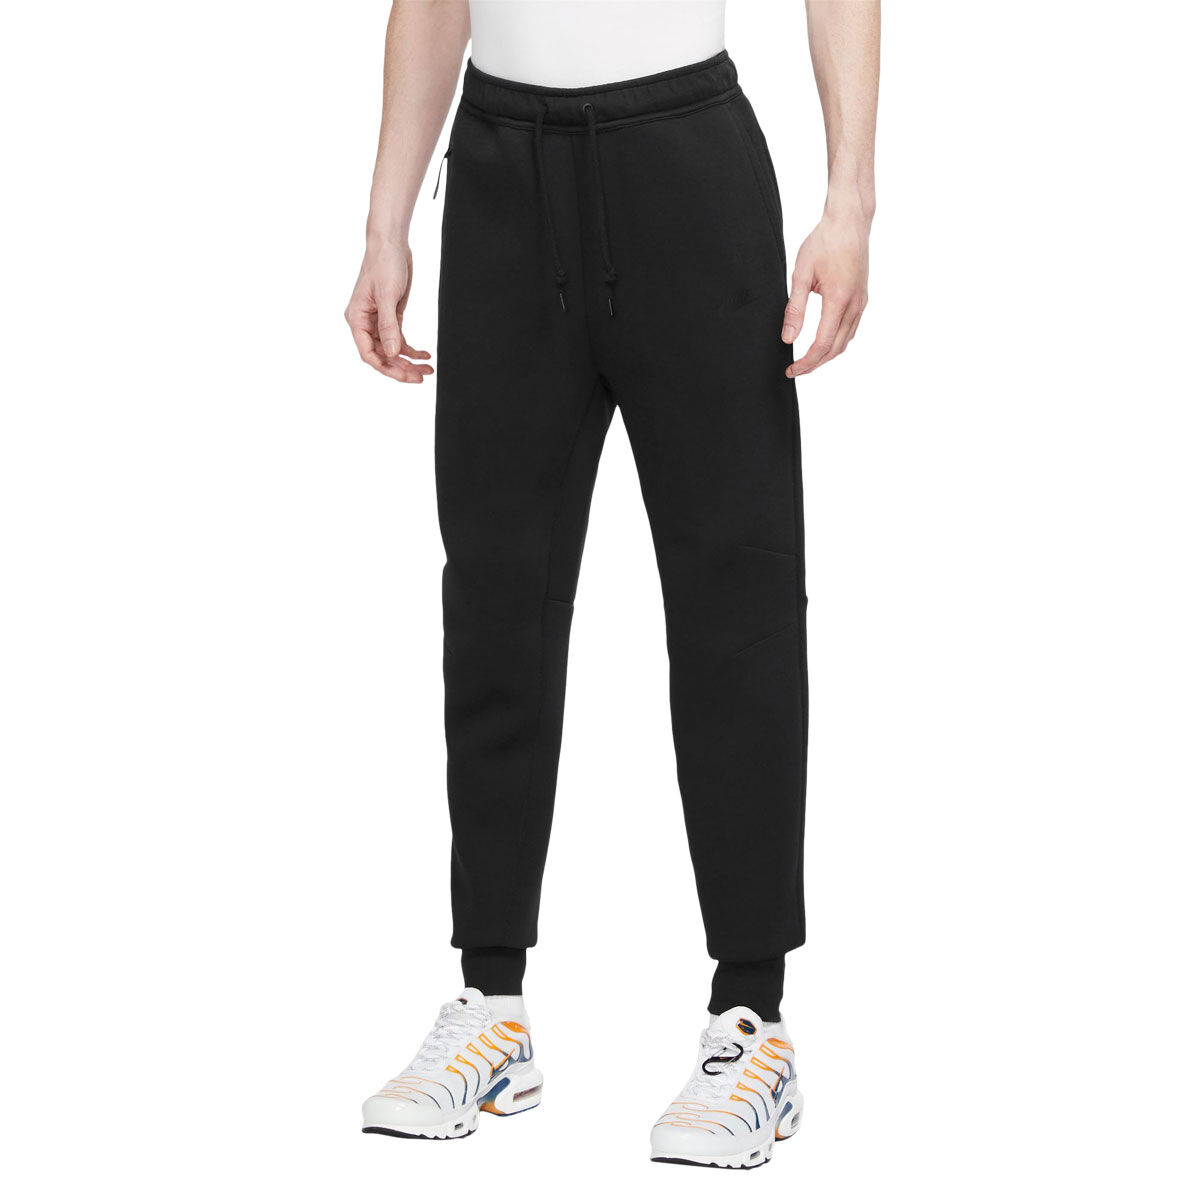 Women's High-Rise Ribbed Jogger Pants 25.5 - All in Motion Black M 1 ct